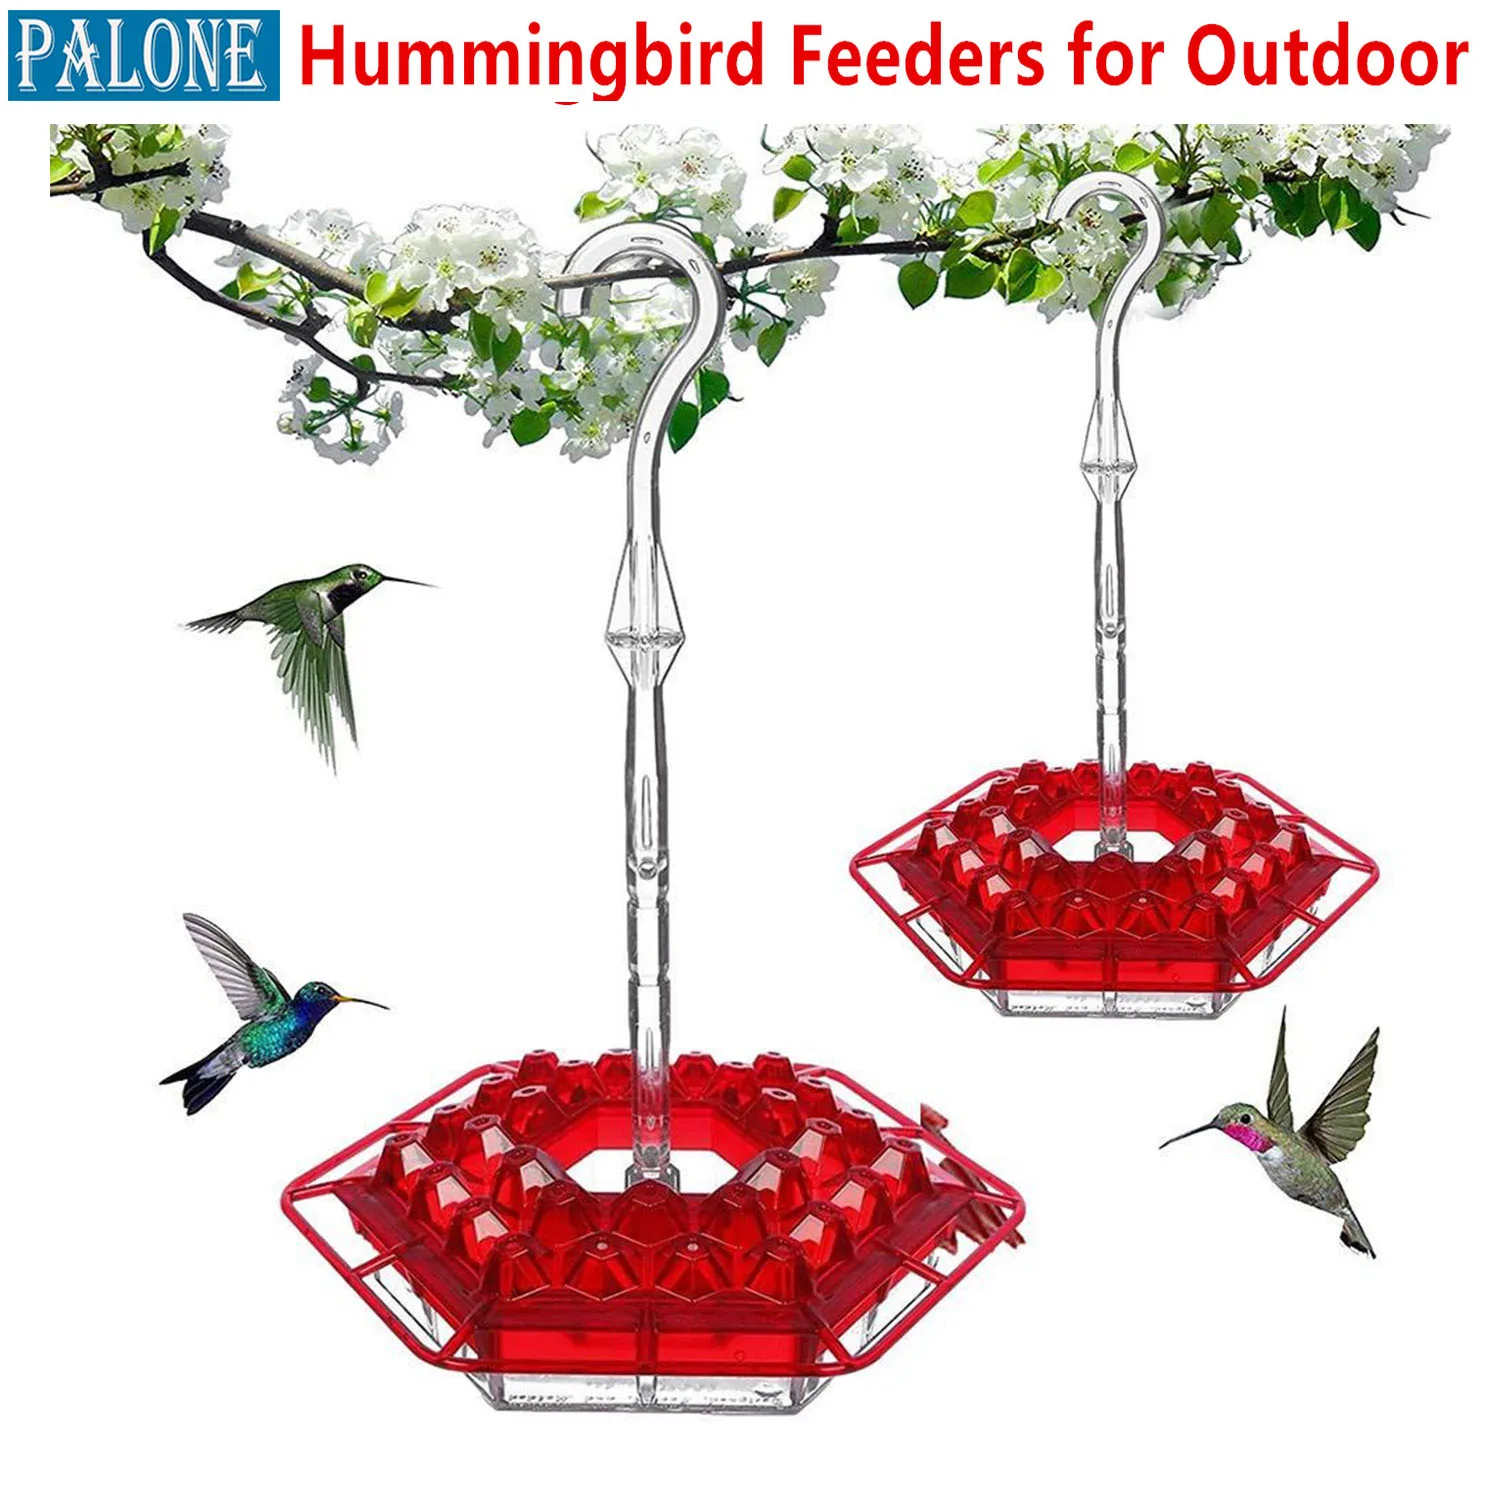 PALONE Hummingbird Feeders for Outdoor Marys with Perch and Built-In Ant Moat Outdoor Bird Feeder Pet Bird Supplies